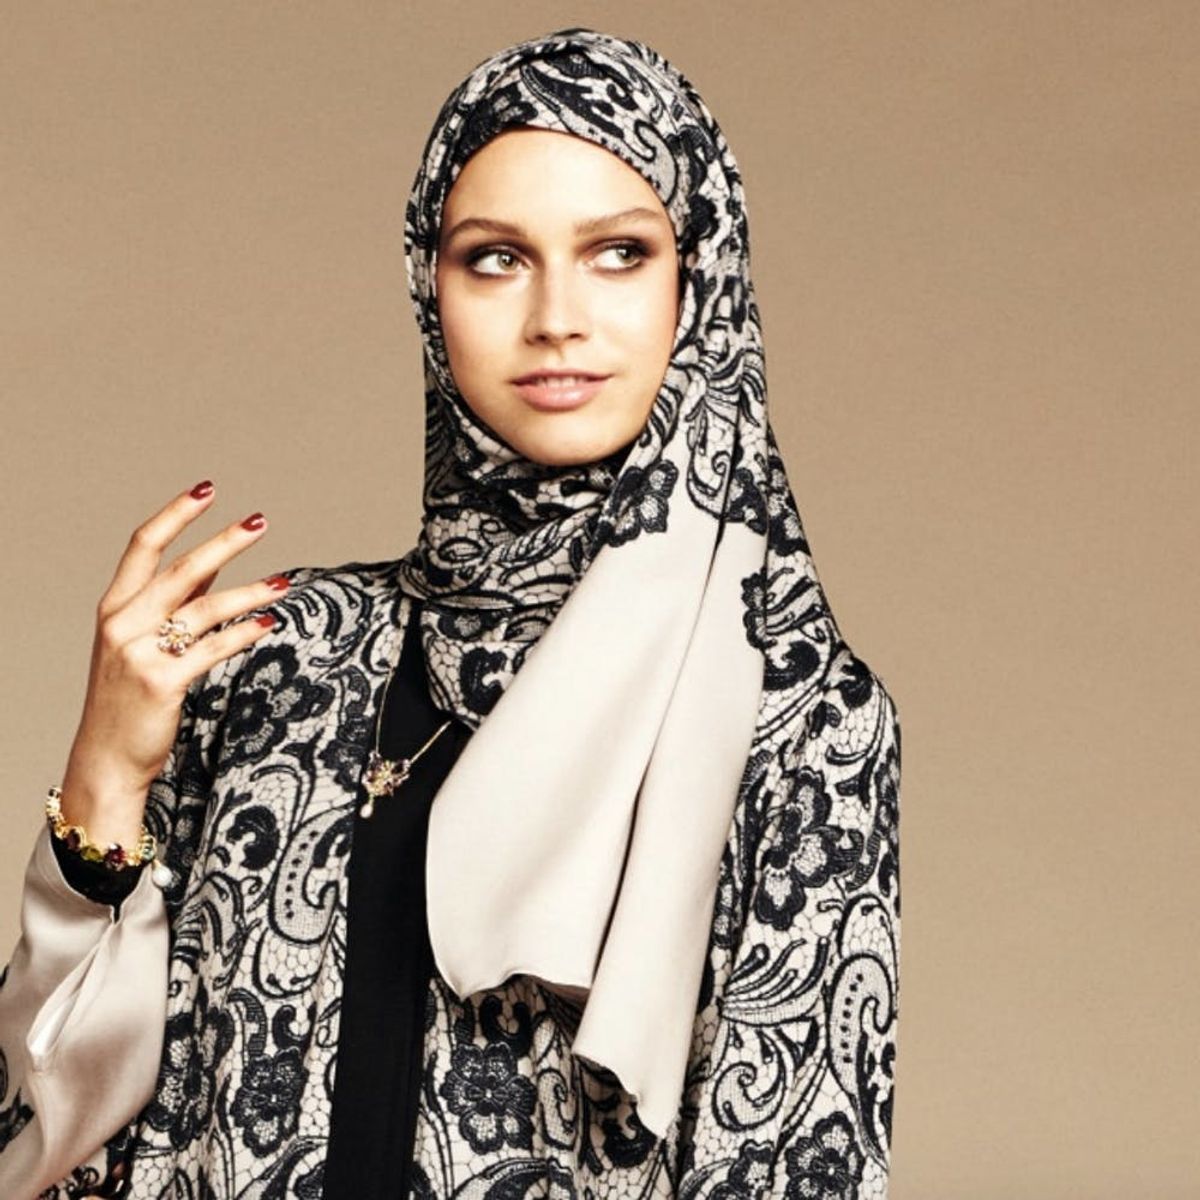 Dolce & Gabbana Just Announced a New Collection of Luxe AF Hijabs